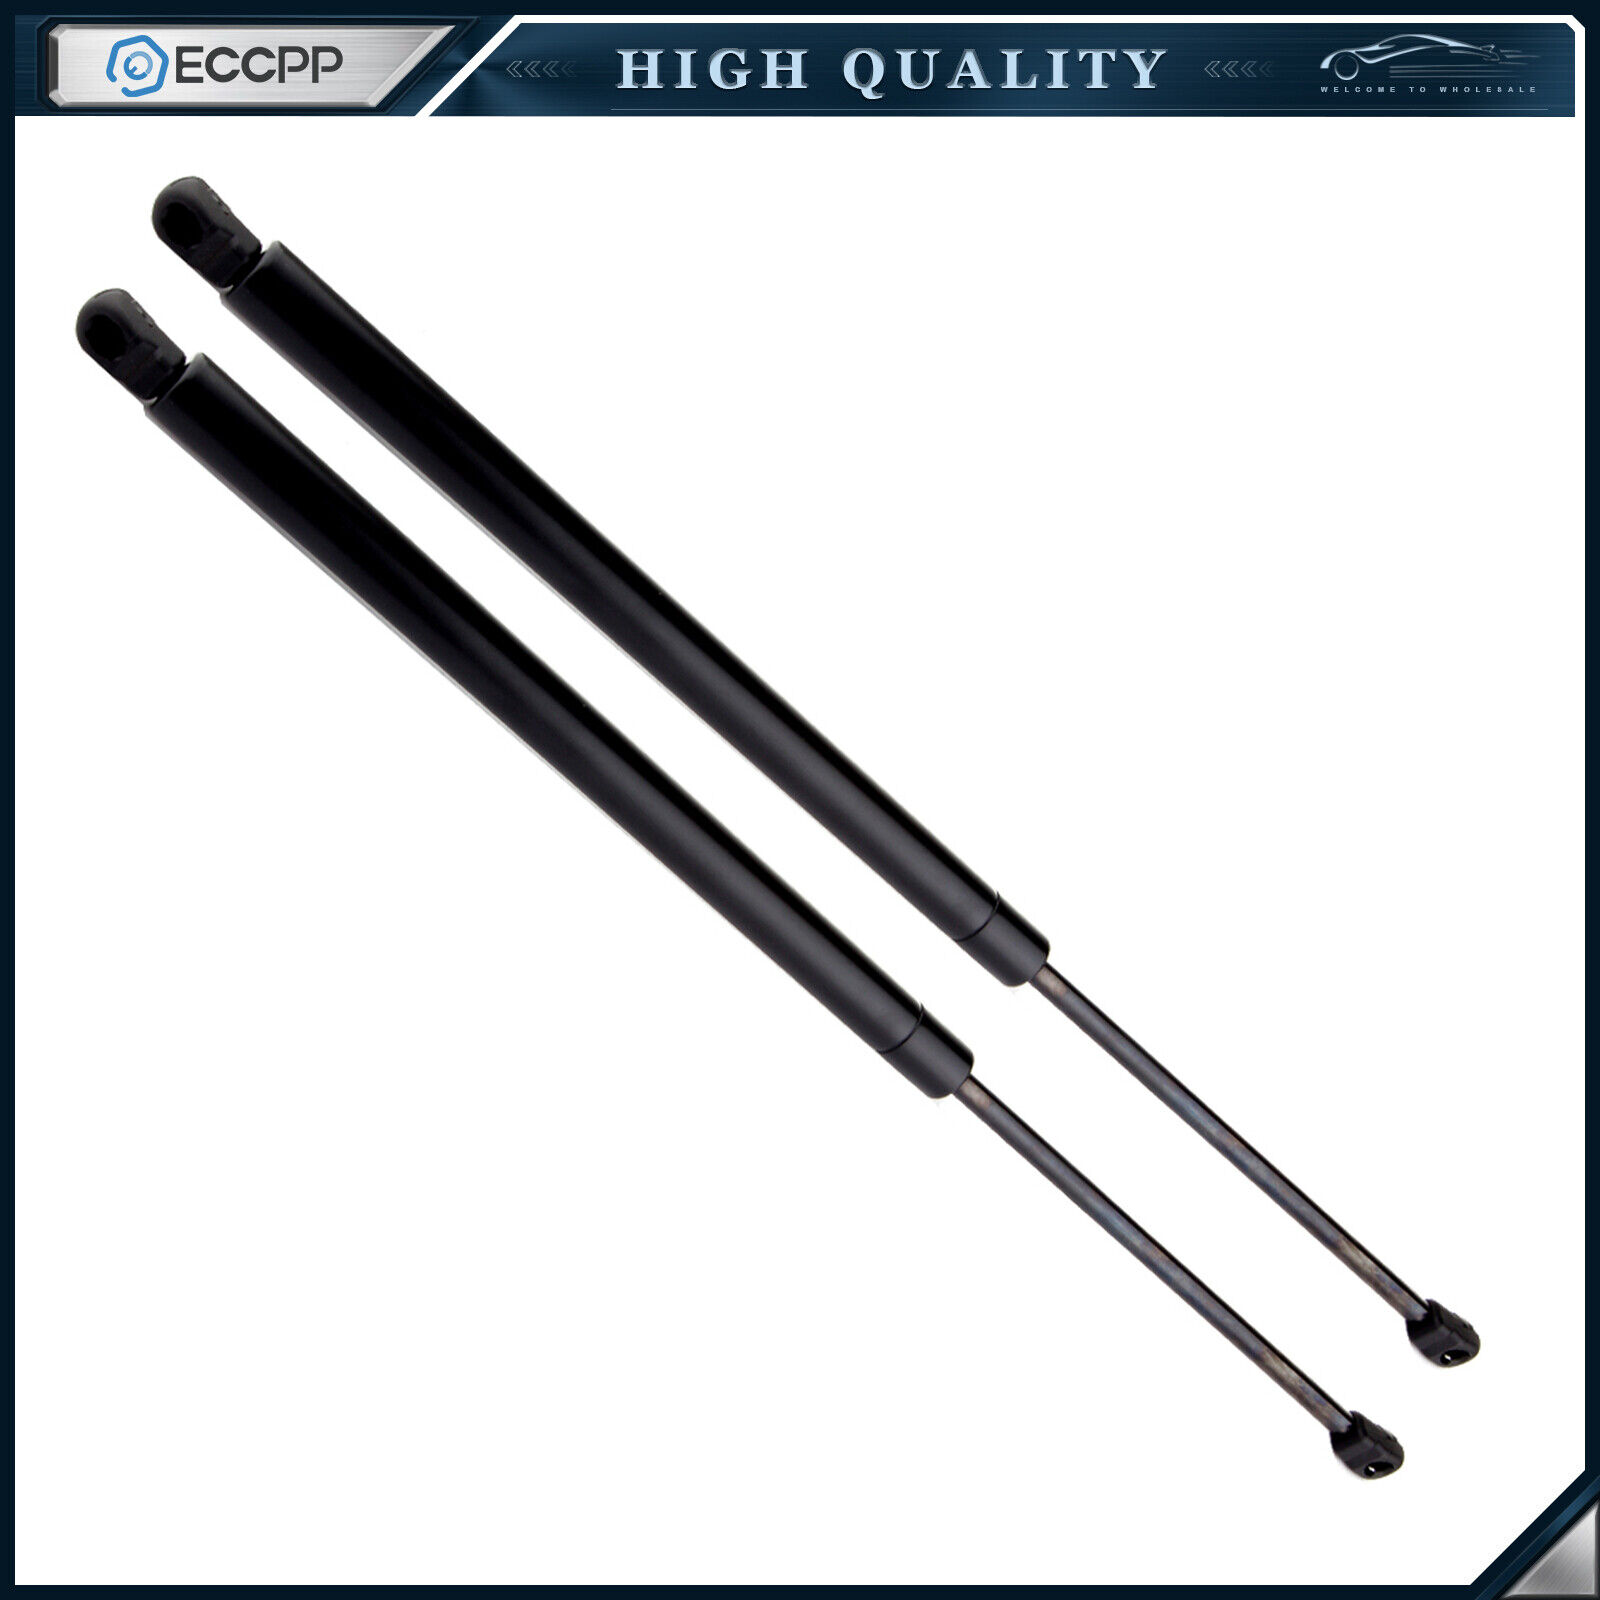 ECCPP 2x Rear Liftgate Gas Lift Supports Struts For Nissan Quest 2004-2010 4589